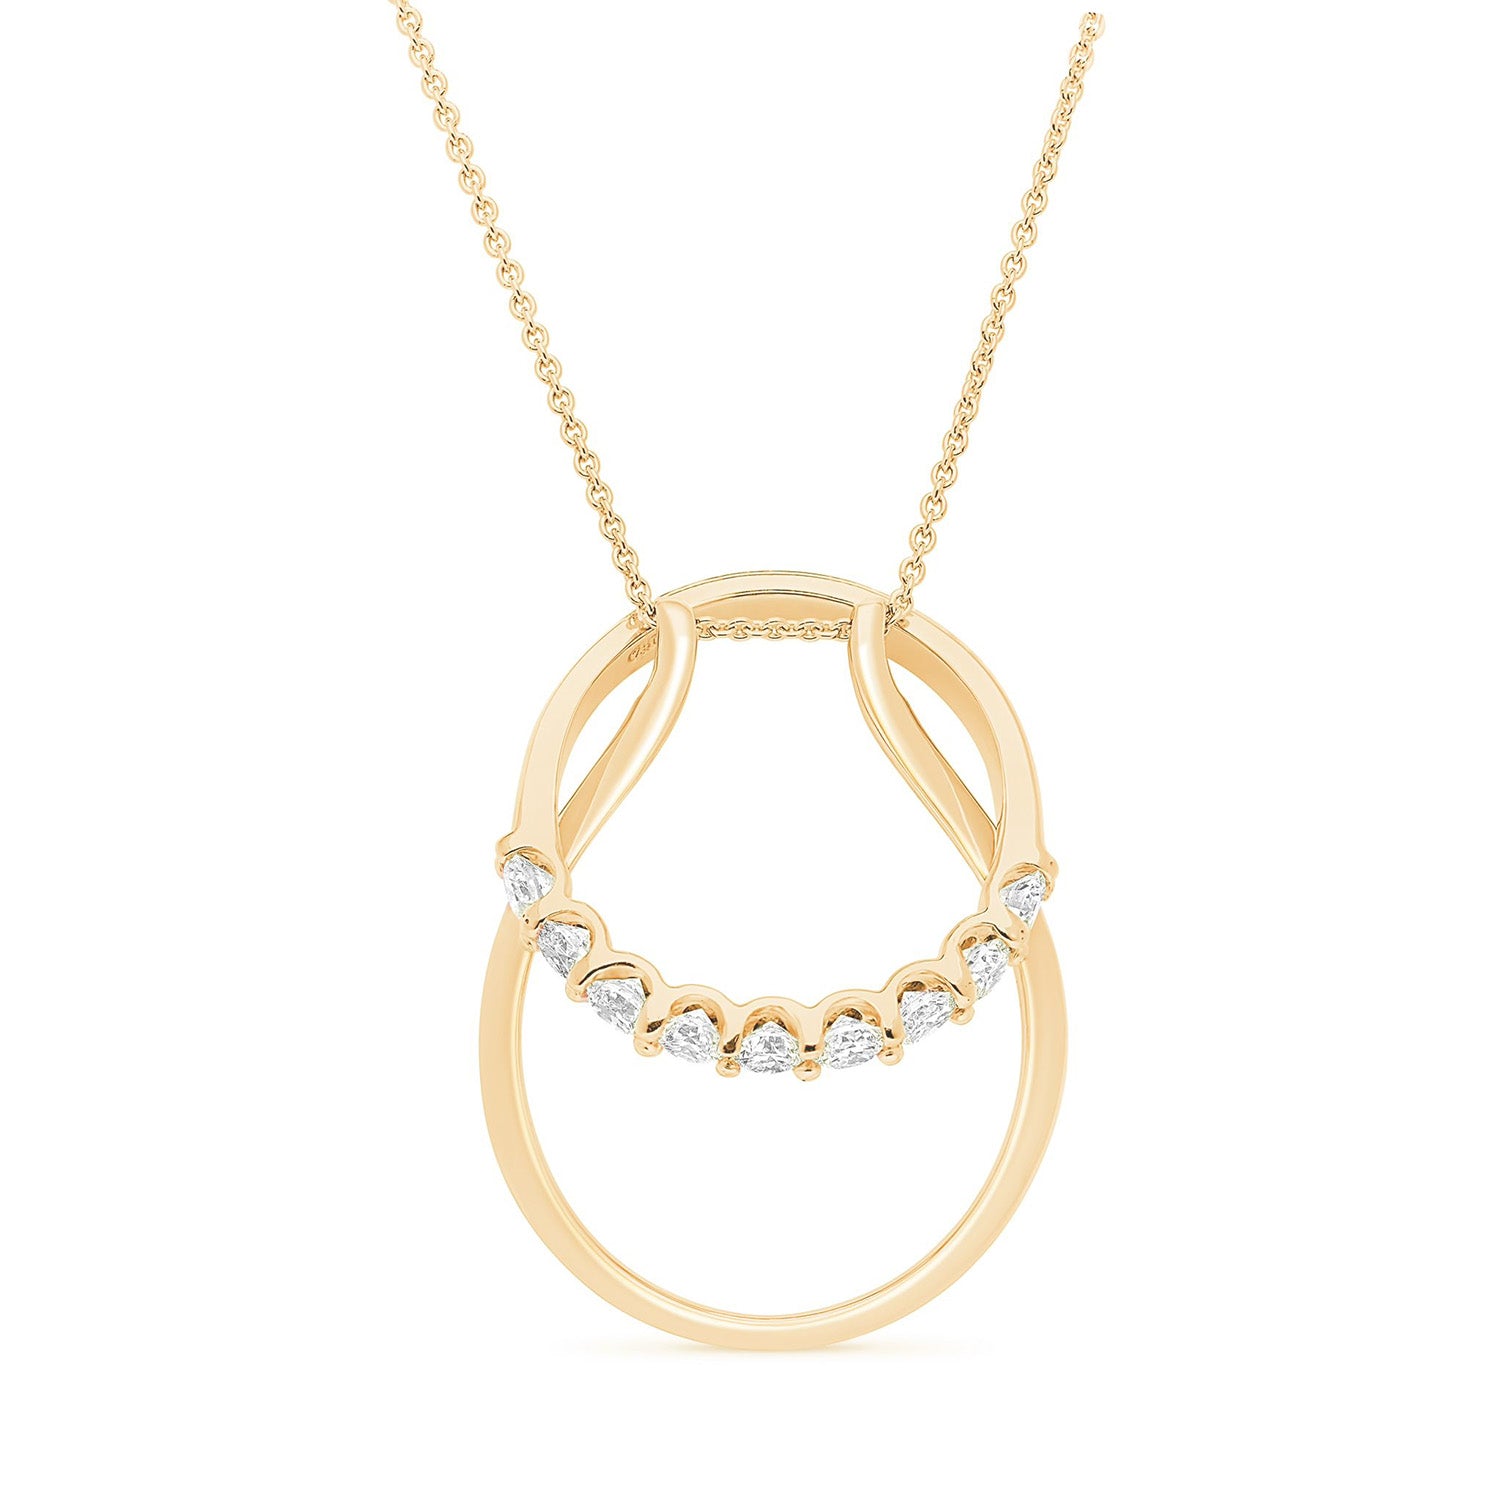 Ring Holder Necklace - Yellow Gold